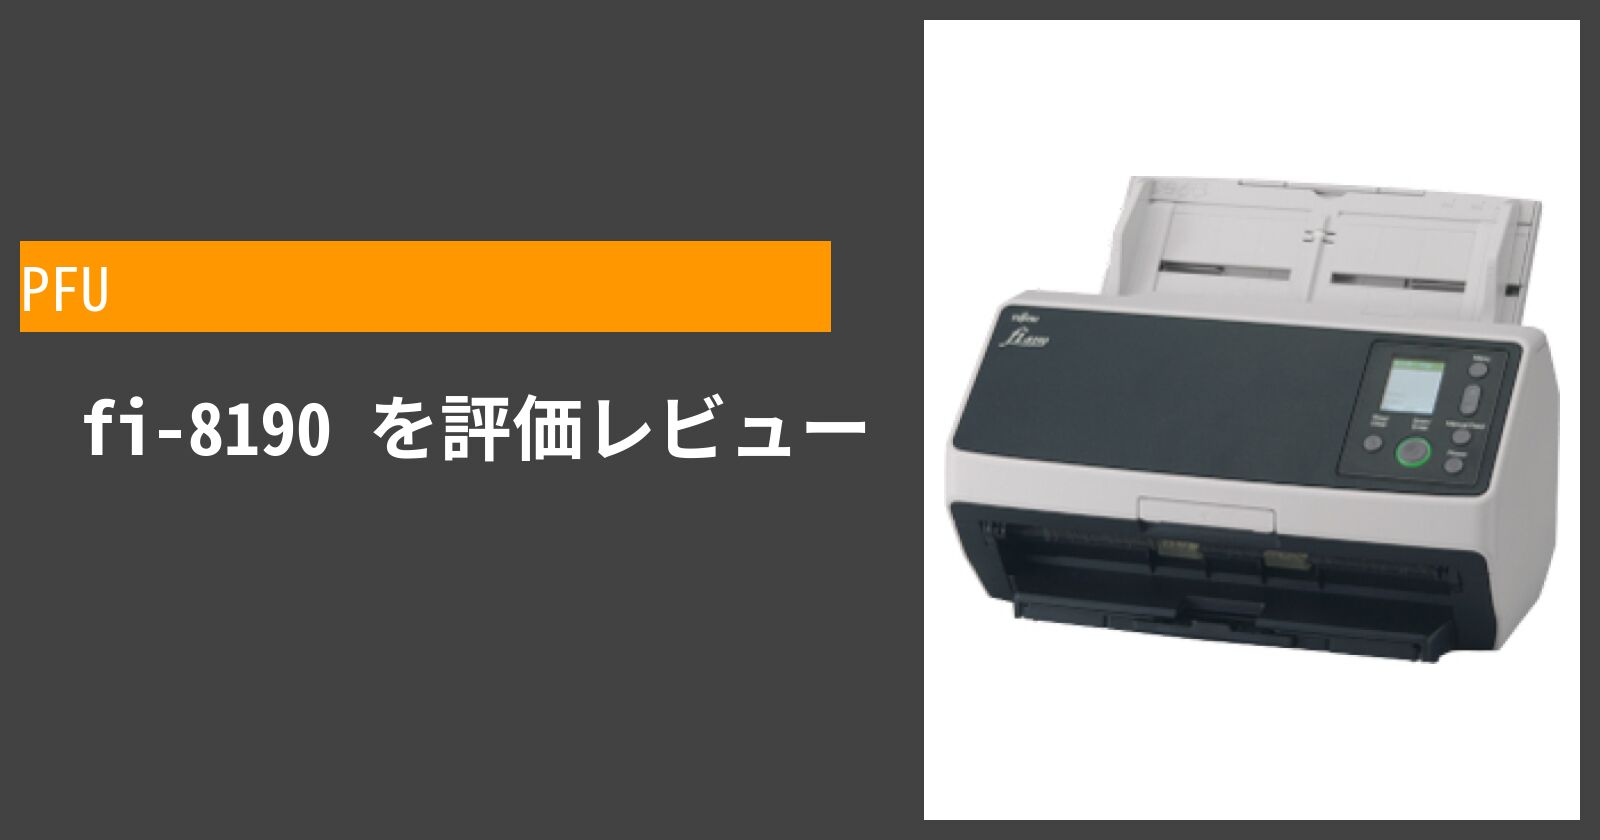  fi-8190 を徹底評価